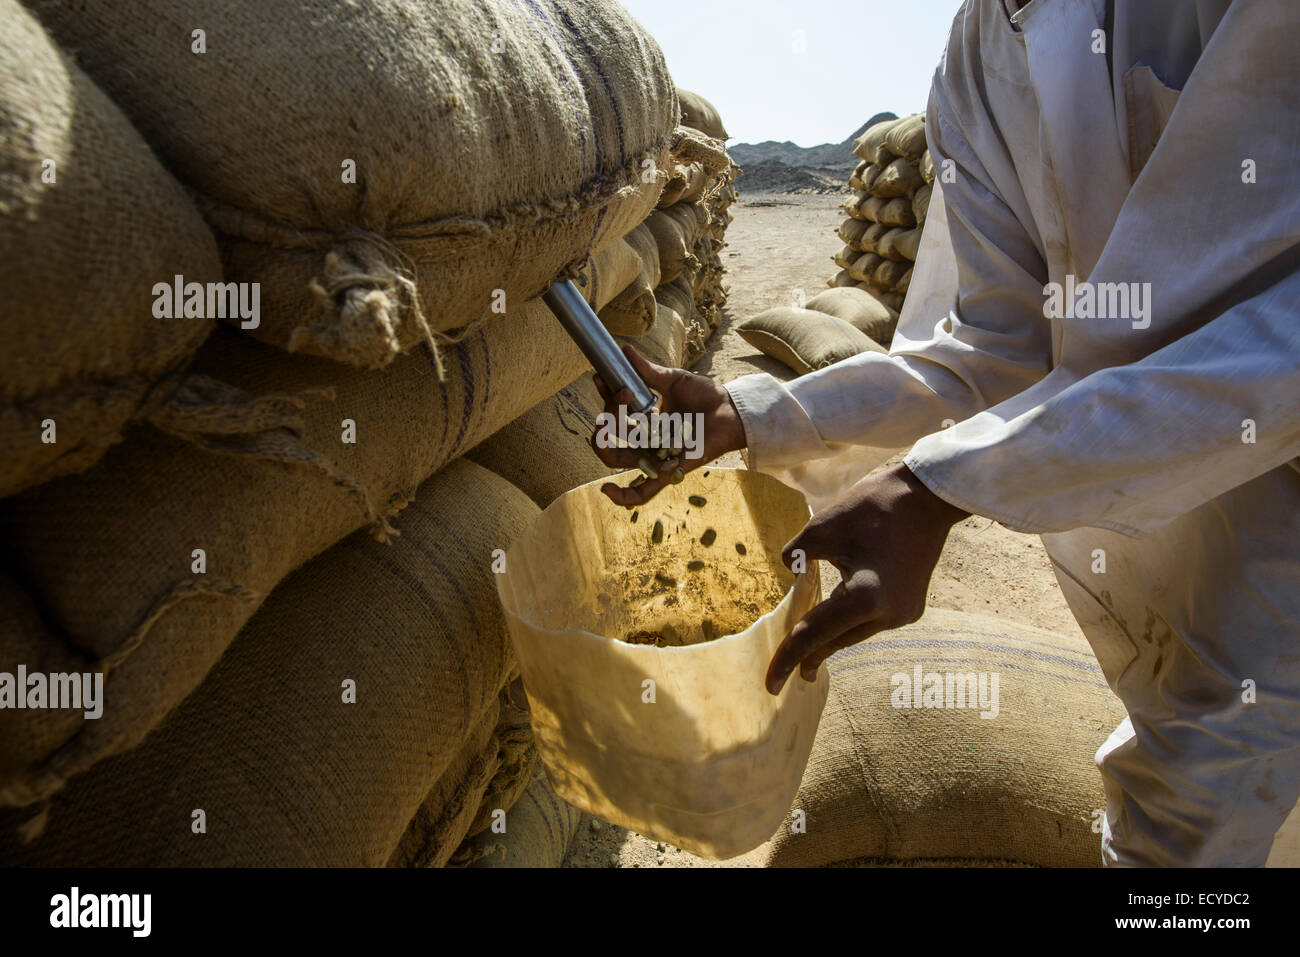 Taking out faba beans from a sack, Sudan Stock Photo